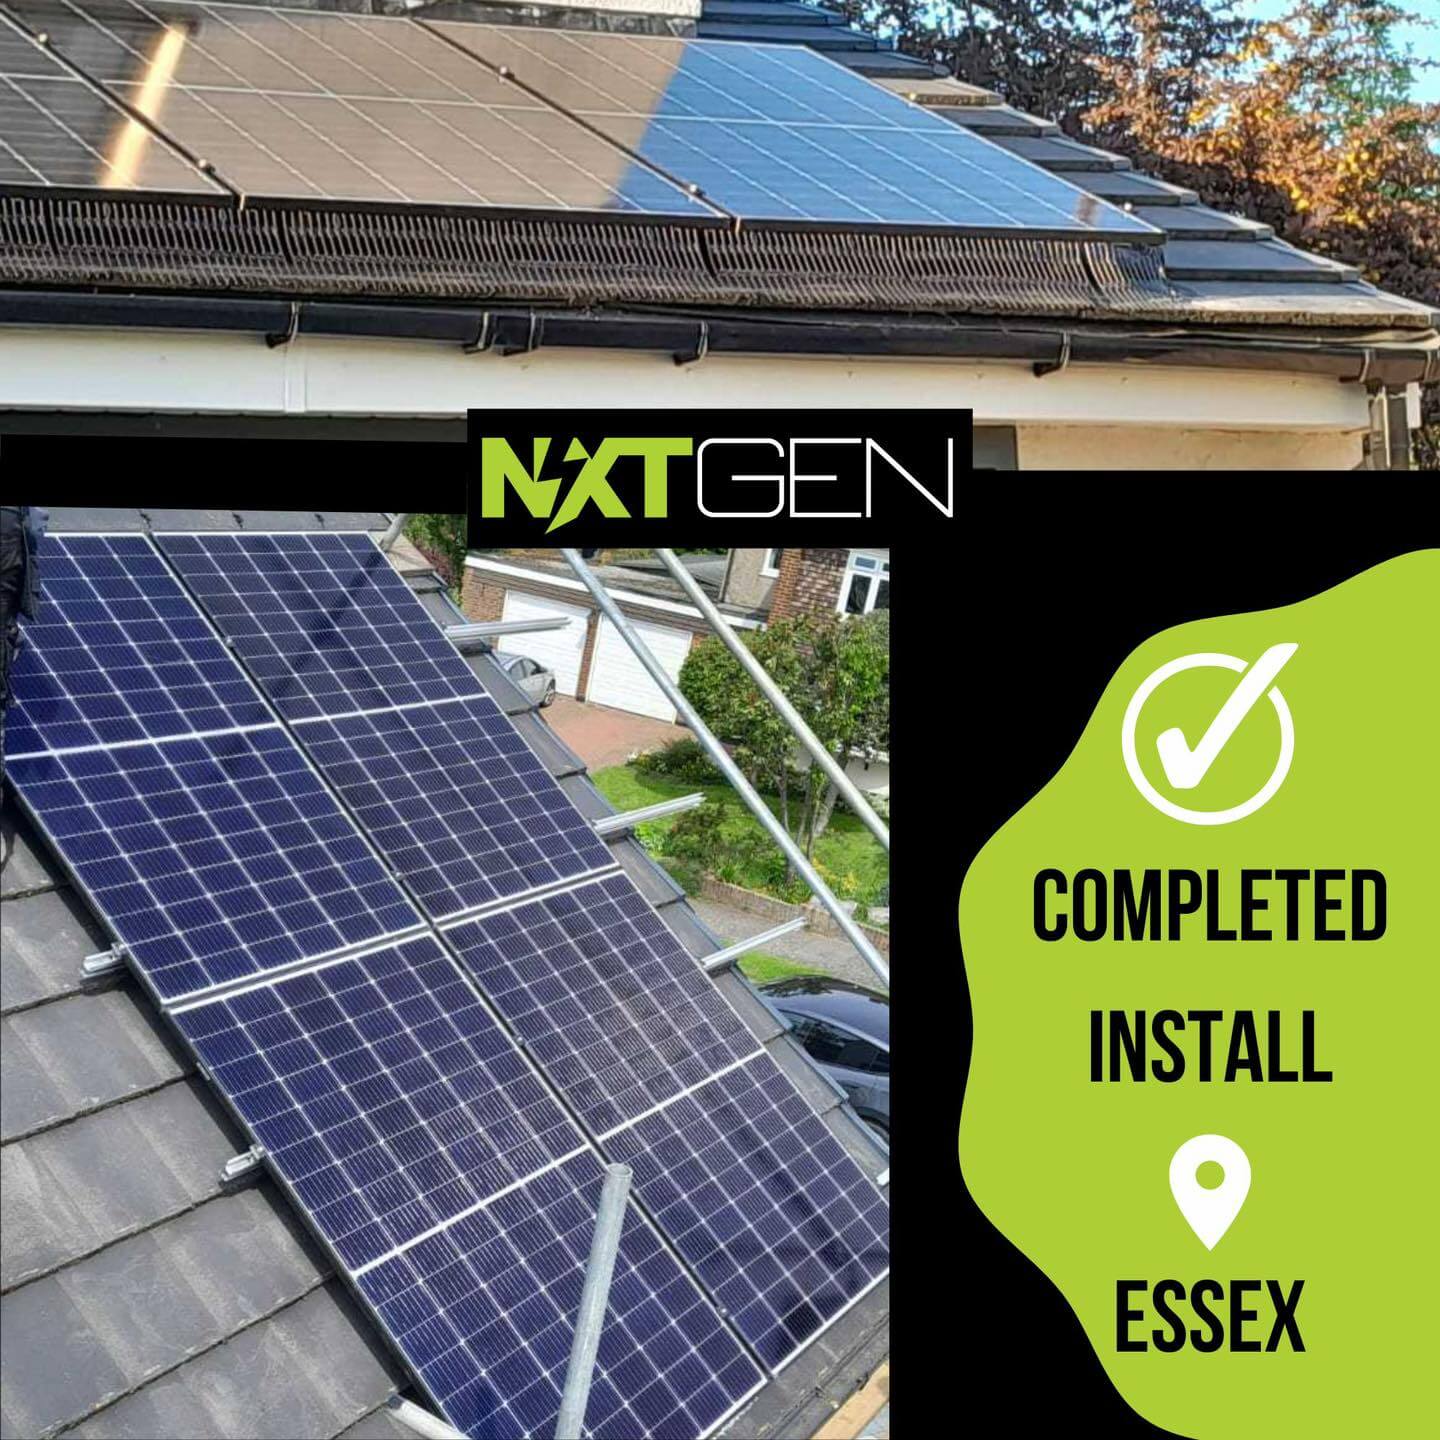 Completed Solar Panel System Install in Essex, UK